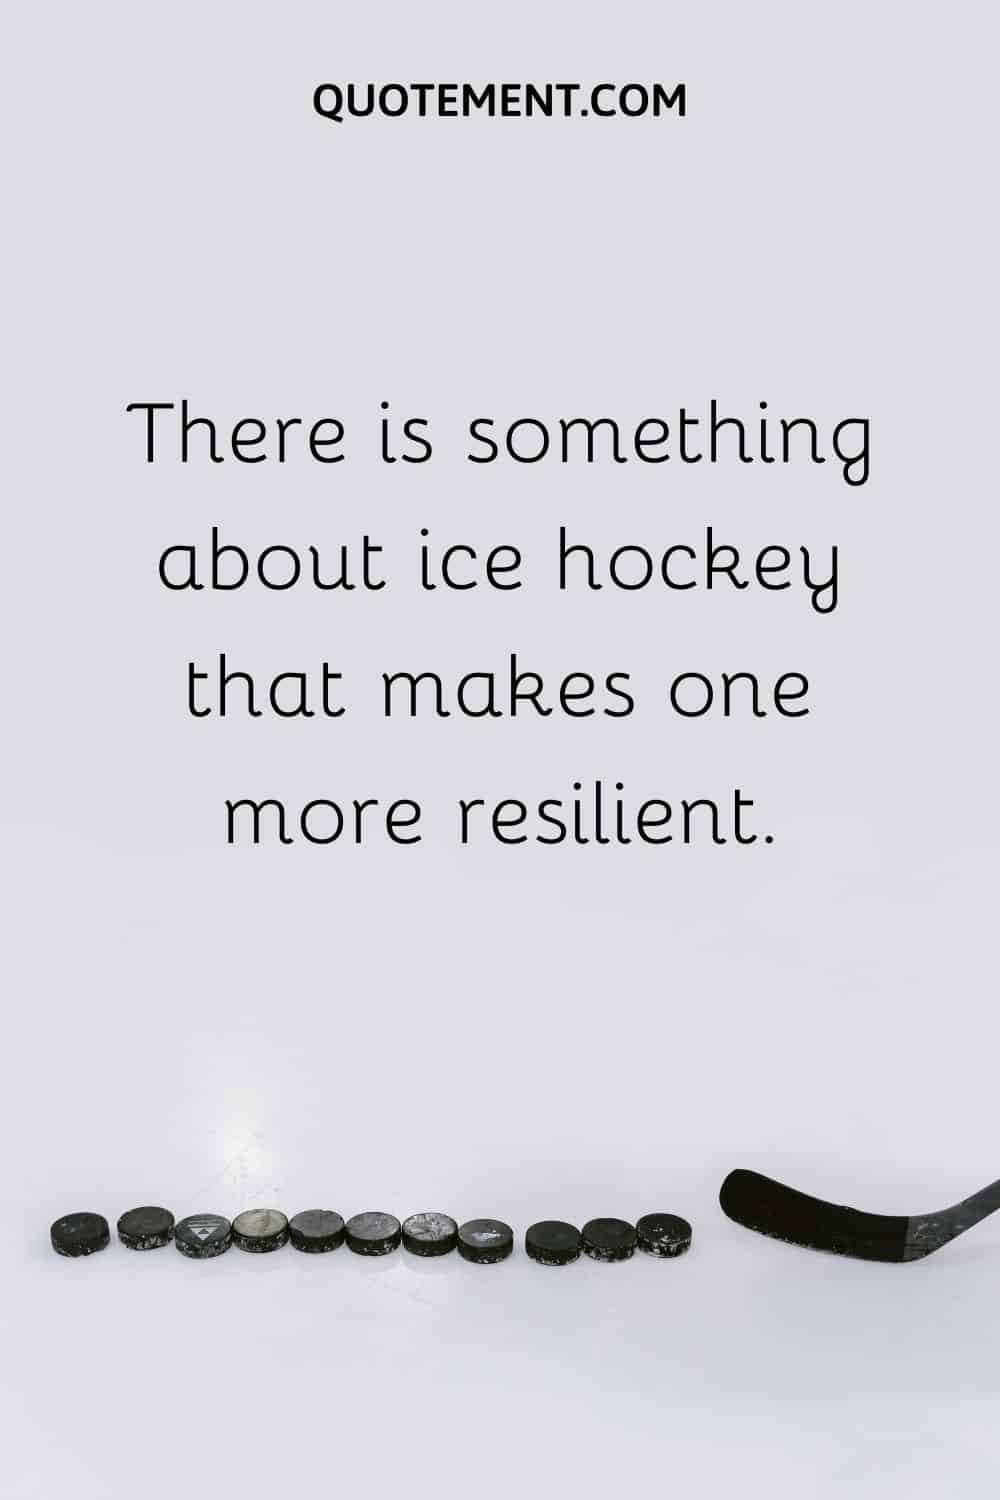 There is something about ice hockey that makes one more resilient.